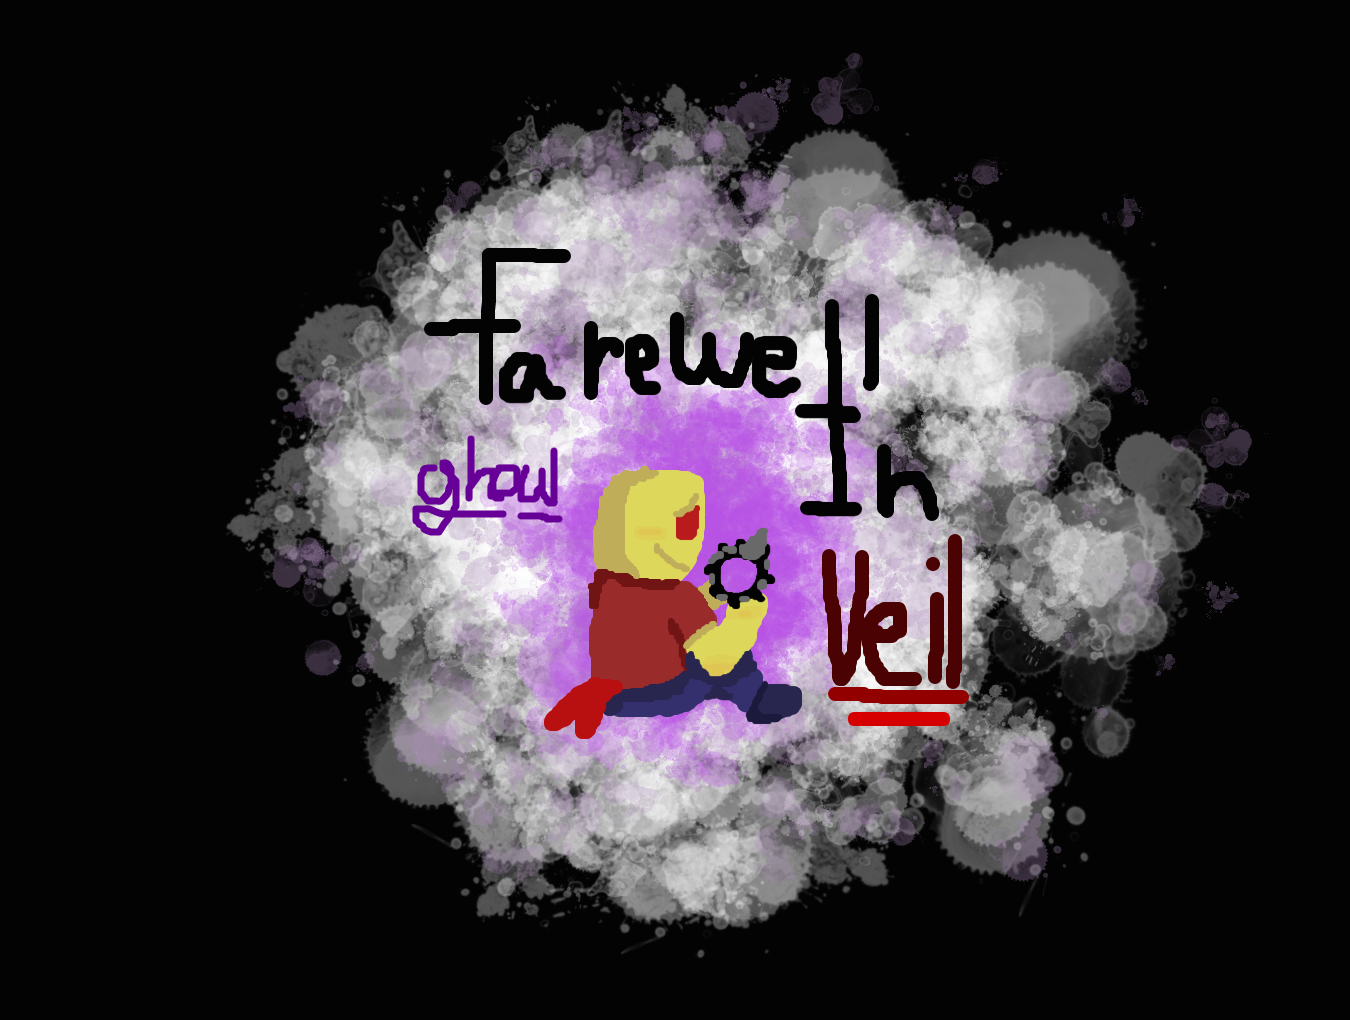 Farewell In Veil Super Paper Roblox By Etherealghoul On Deviantart - roblox veil buy